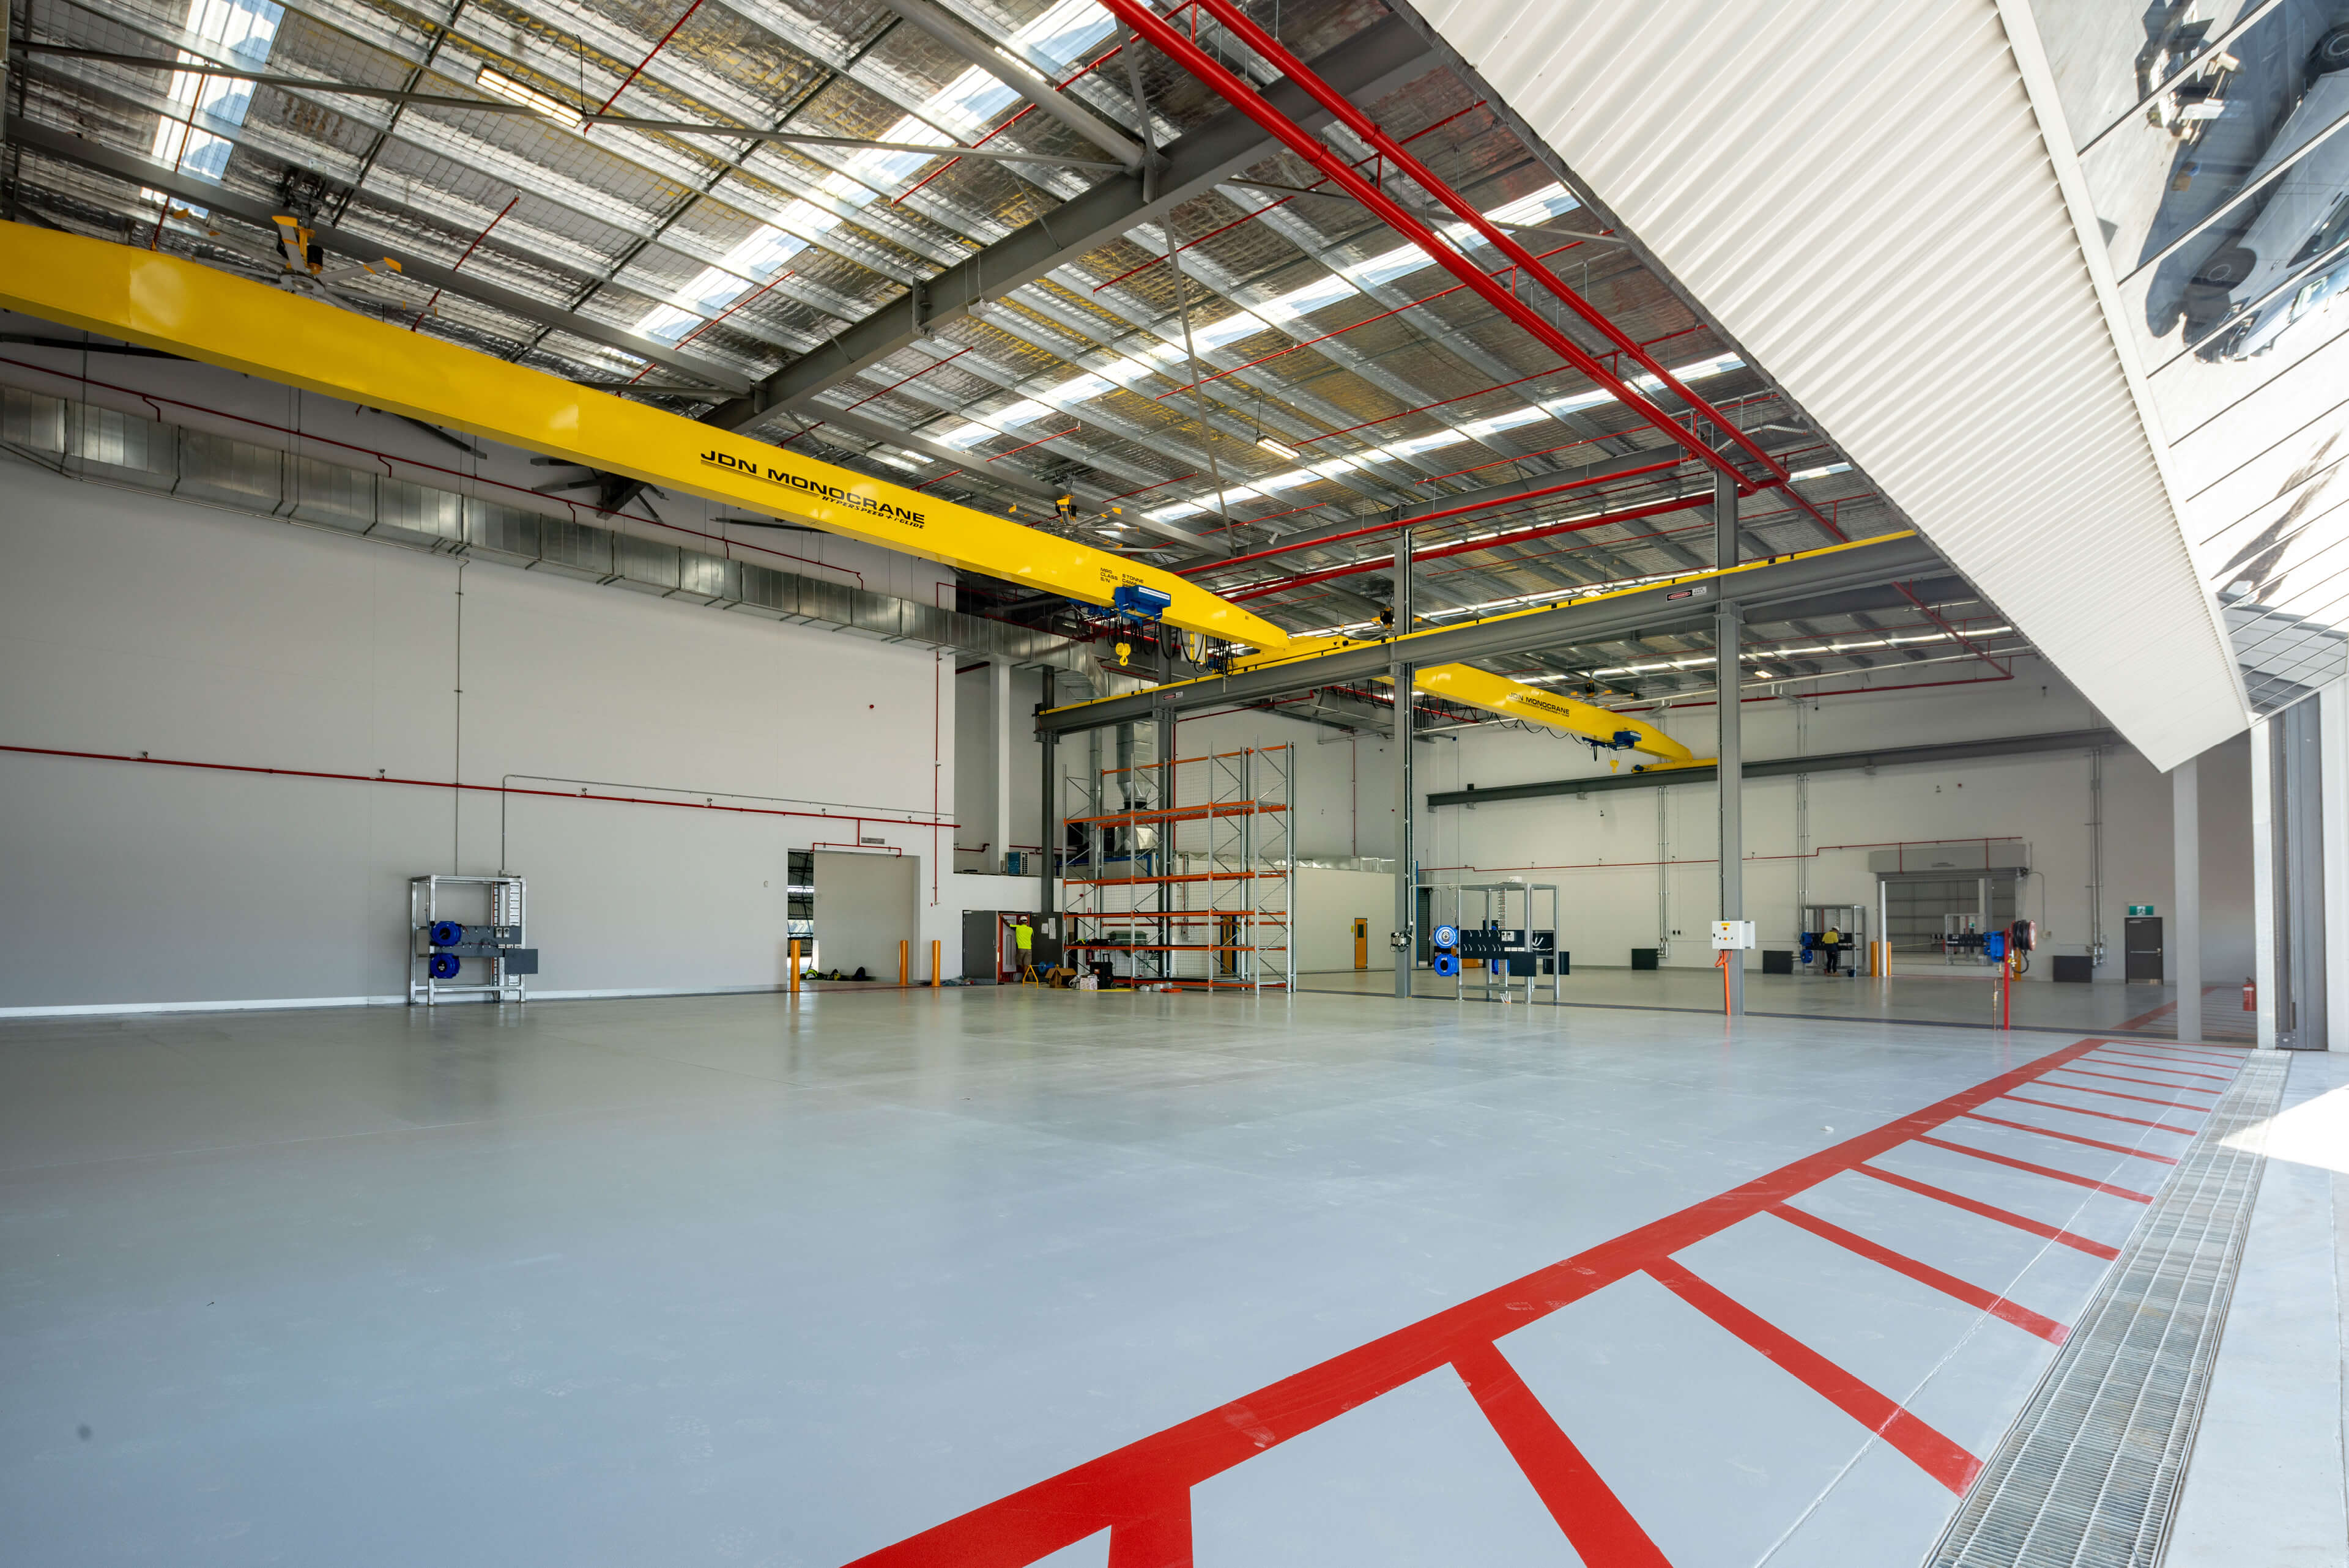 10 interior view of hangar bays with red floor markings for fixed wing operation at polair facility bankstown taylor construction refurbishment and live environments